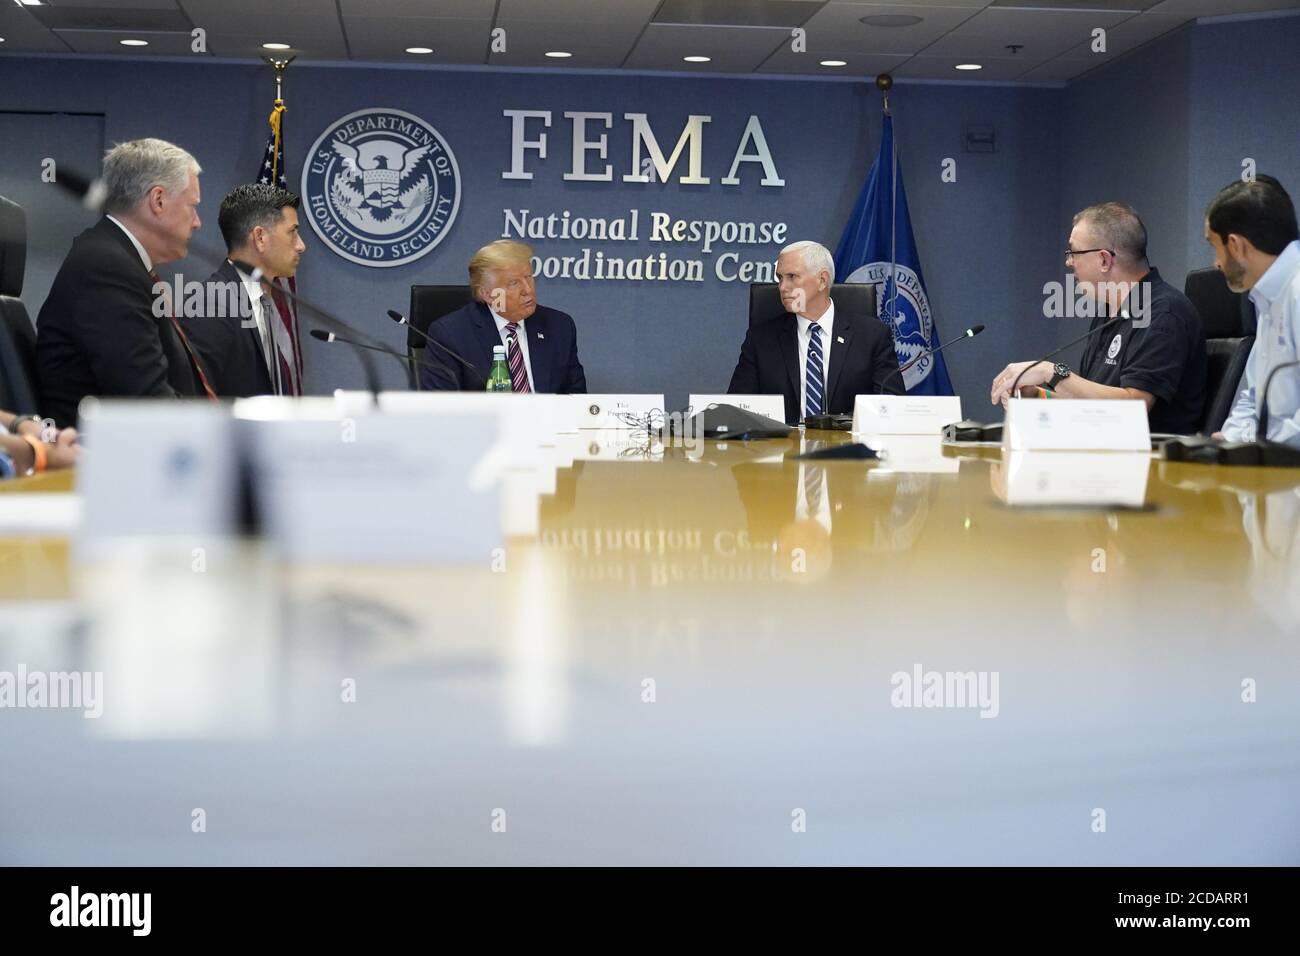 United States President Donald J. Trump and US Vice President Mike Pence visit the Federal Emergency Management Agency (FEMA) headquarters in Washington, DC for a briefing on Hurricane Laura on August 27, 2020. From left to right: Mark Meadows, Assistant to the President and Chief of Staff, acting US Secretary of Homeland Security Chad F. Wolf, US President Donald J. Trump, US Vice President Mike Pence, Pete Gaynor, Administrator, Federal Emergency Management Agency (FEMA).Credit: Erin Scott/Pool via CNP *** Local Caption *** BSMID5075494 | usage worldwide Stock Photo